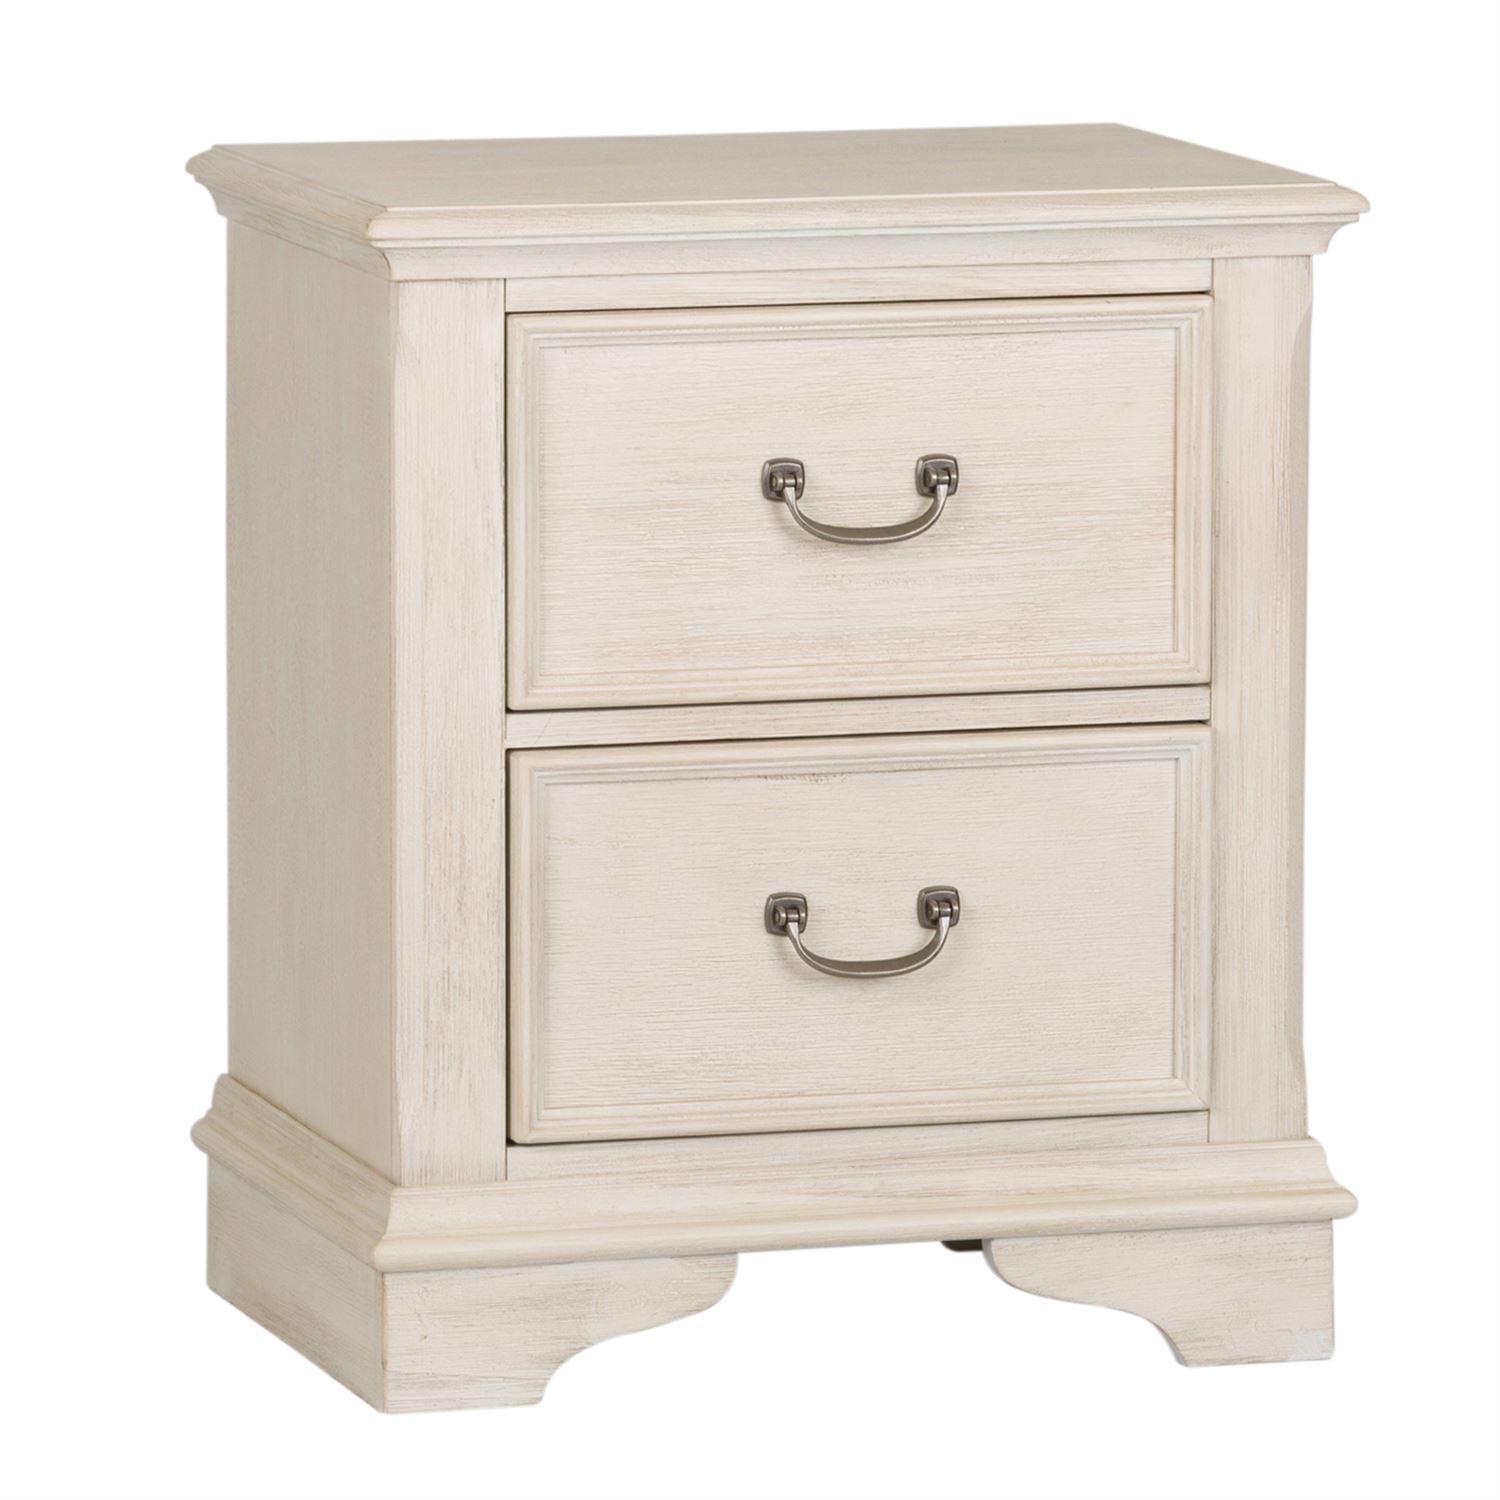 Transitional Nightstand Bayside  249-BR60 249-BR60 in White 